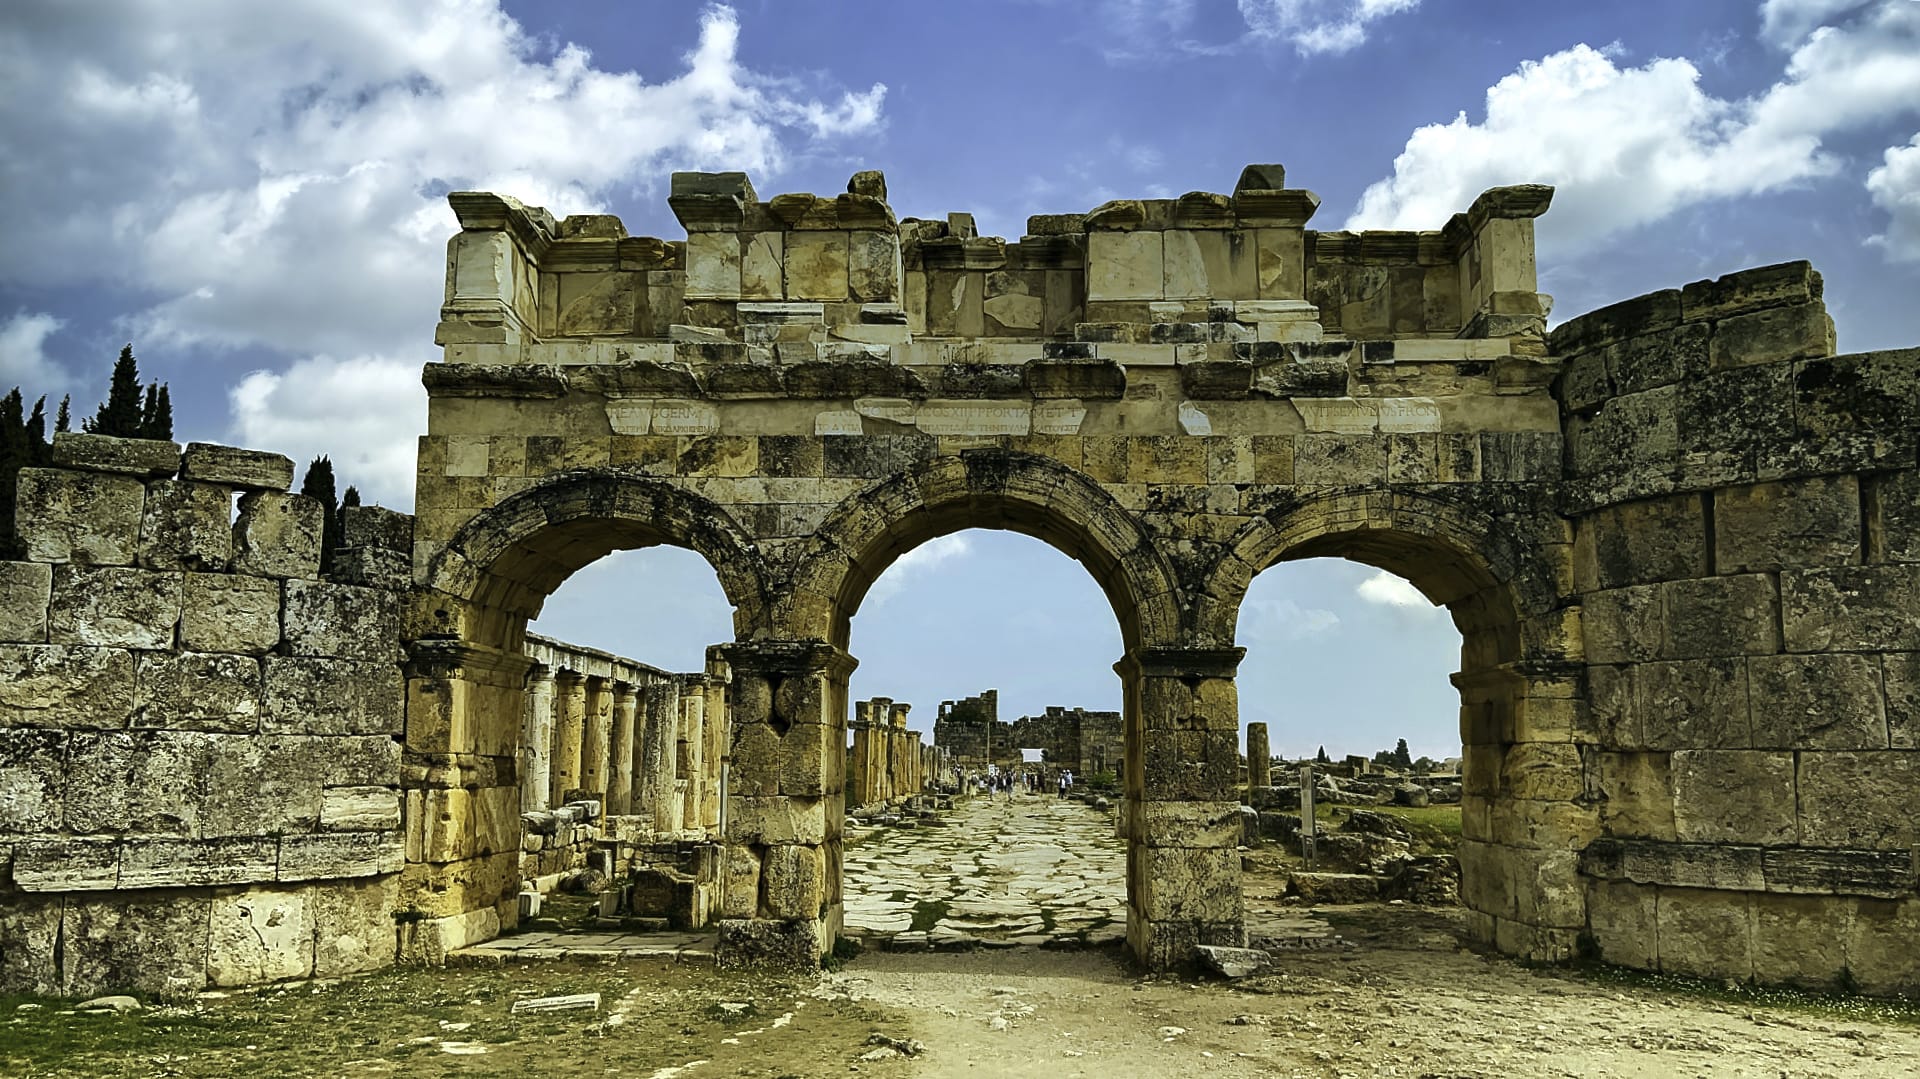 Turkey’s Antalya Province still has tons of Roman ruins, because return shipping would’ve cost a fortune.